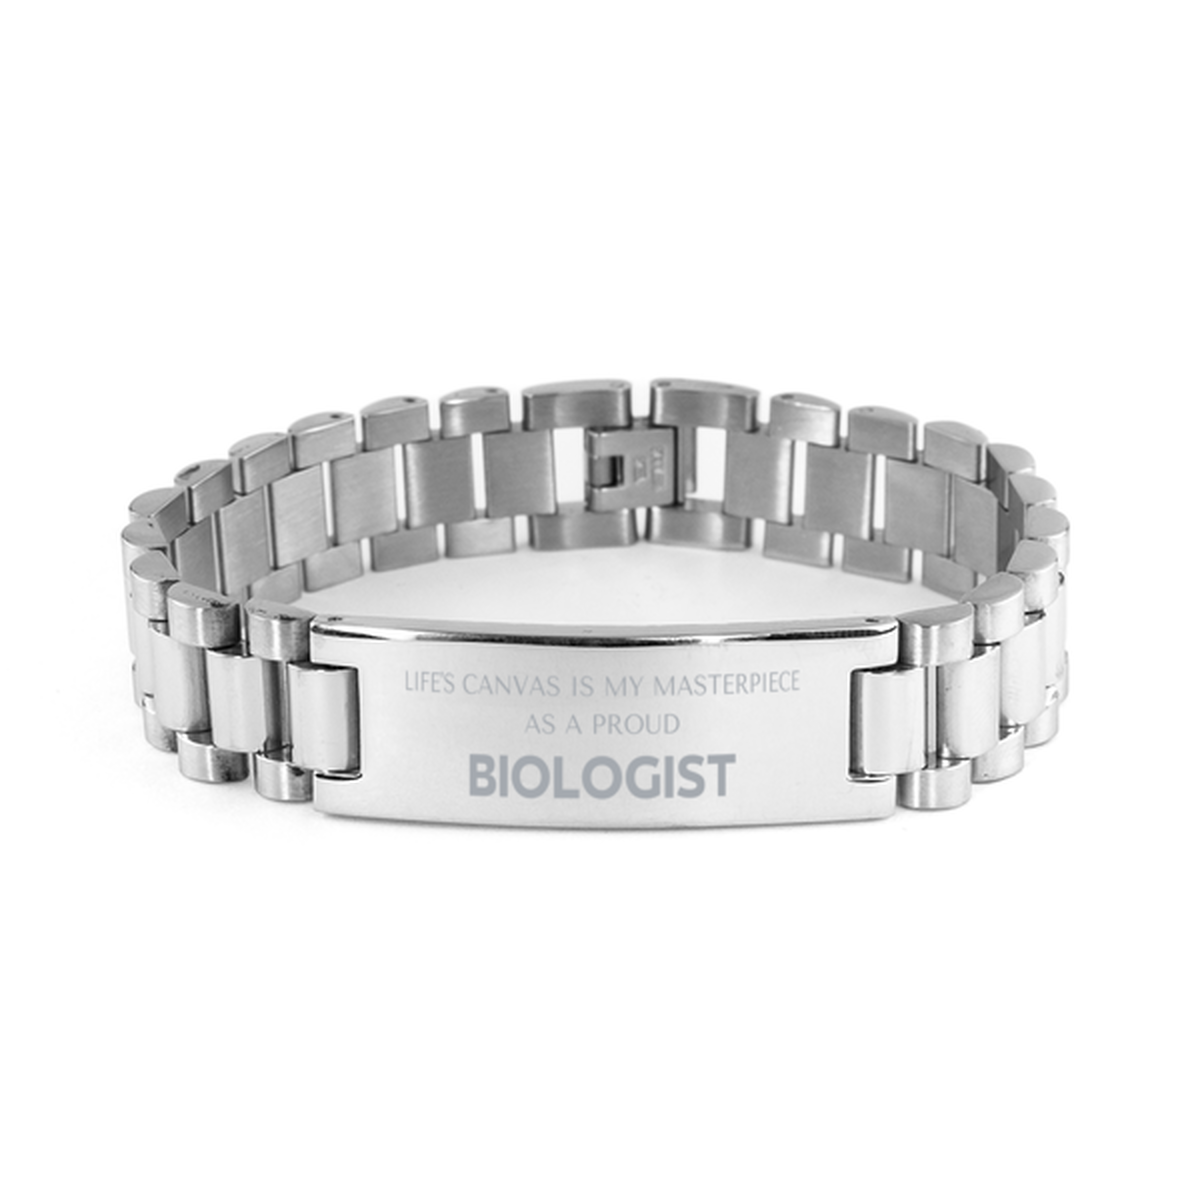 Proud Biologist Gifts, Life's canvas is my masterpiece, Epic Birthday Christmas Unique Ladder Stainless Steel Bracelet For Biologist, Coworkers, Men, Women, Friends